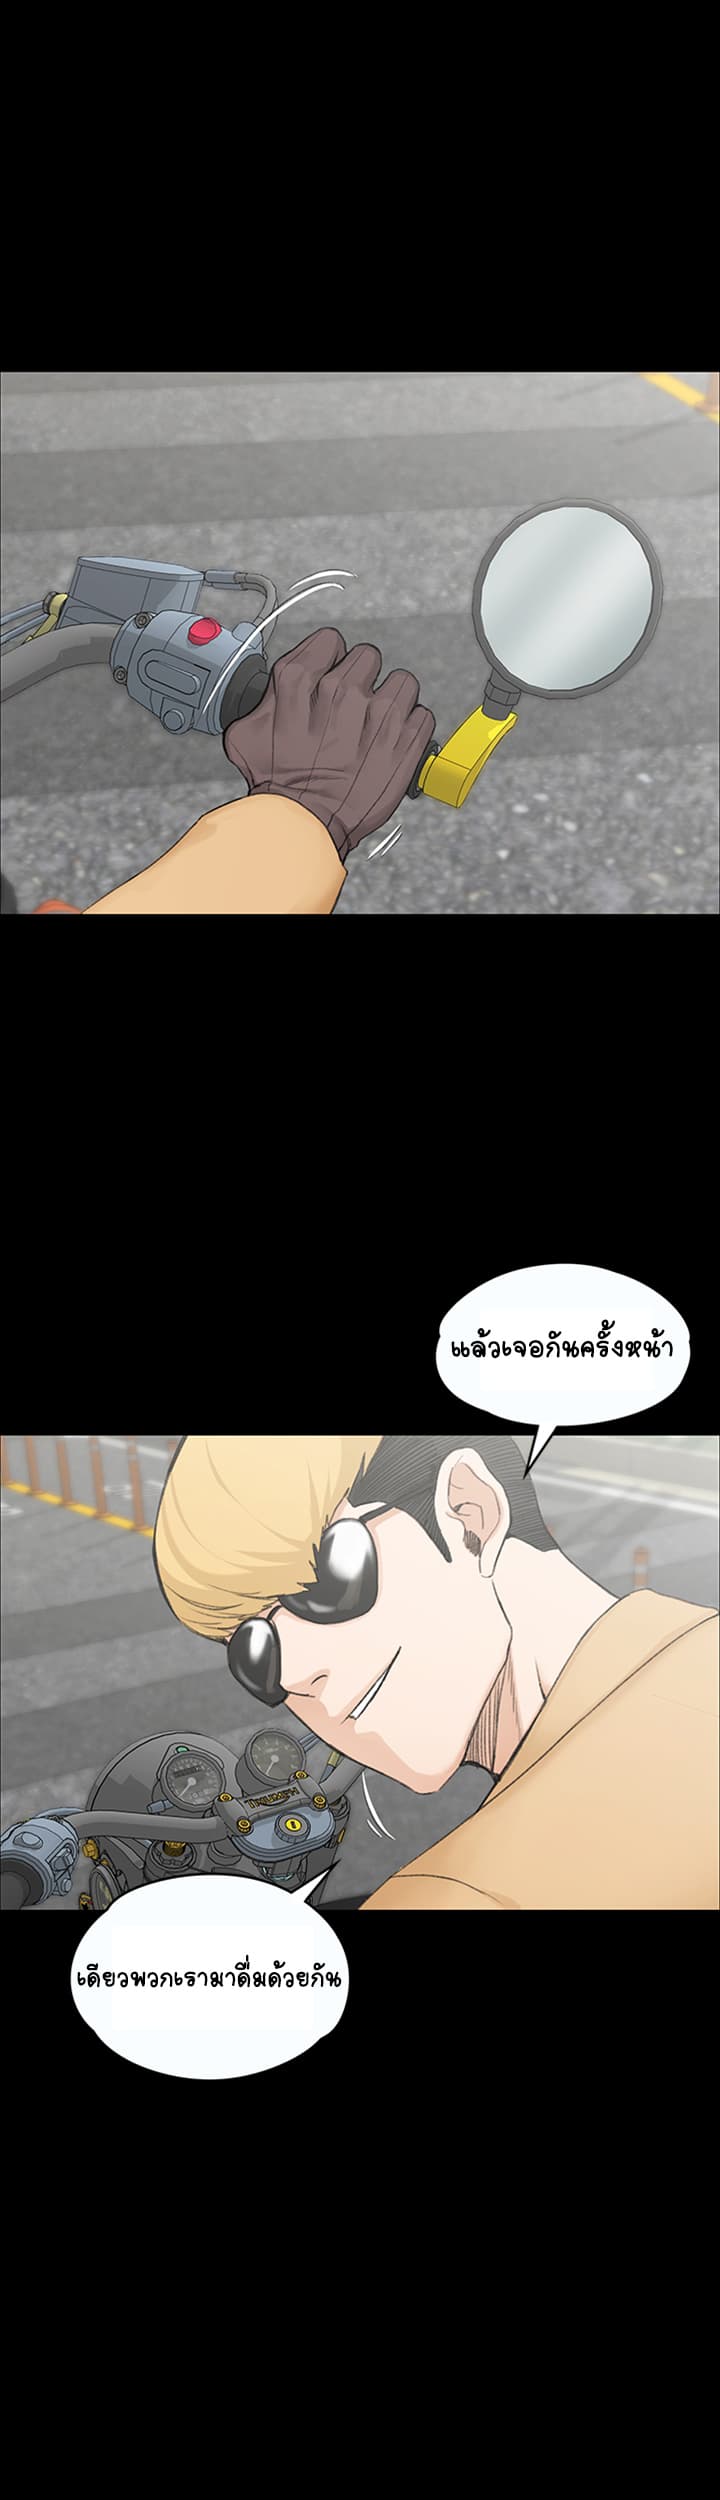 His Place - หน้า 8